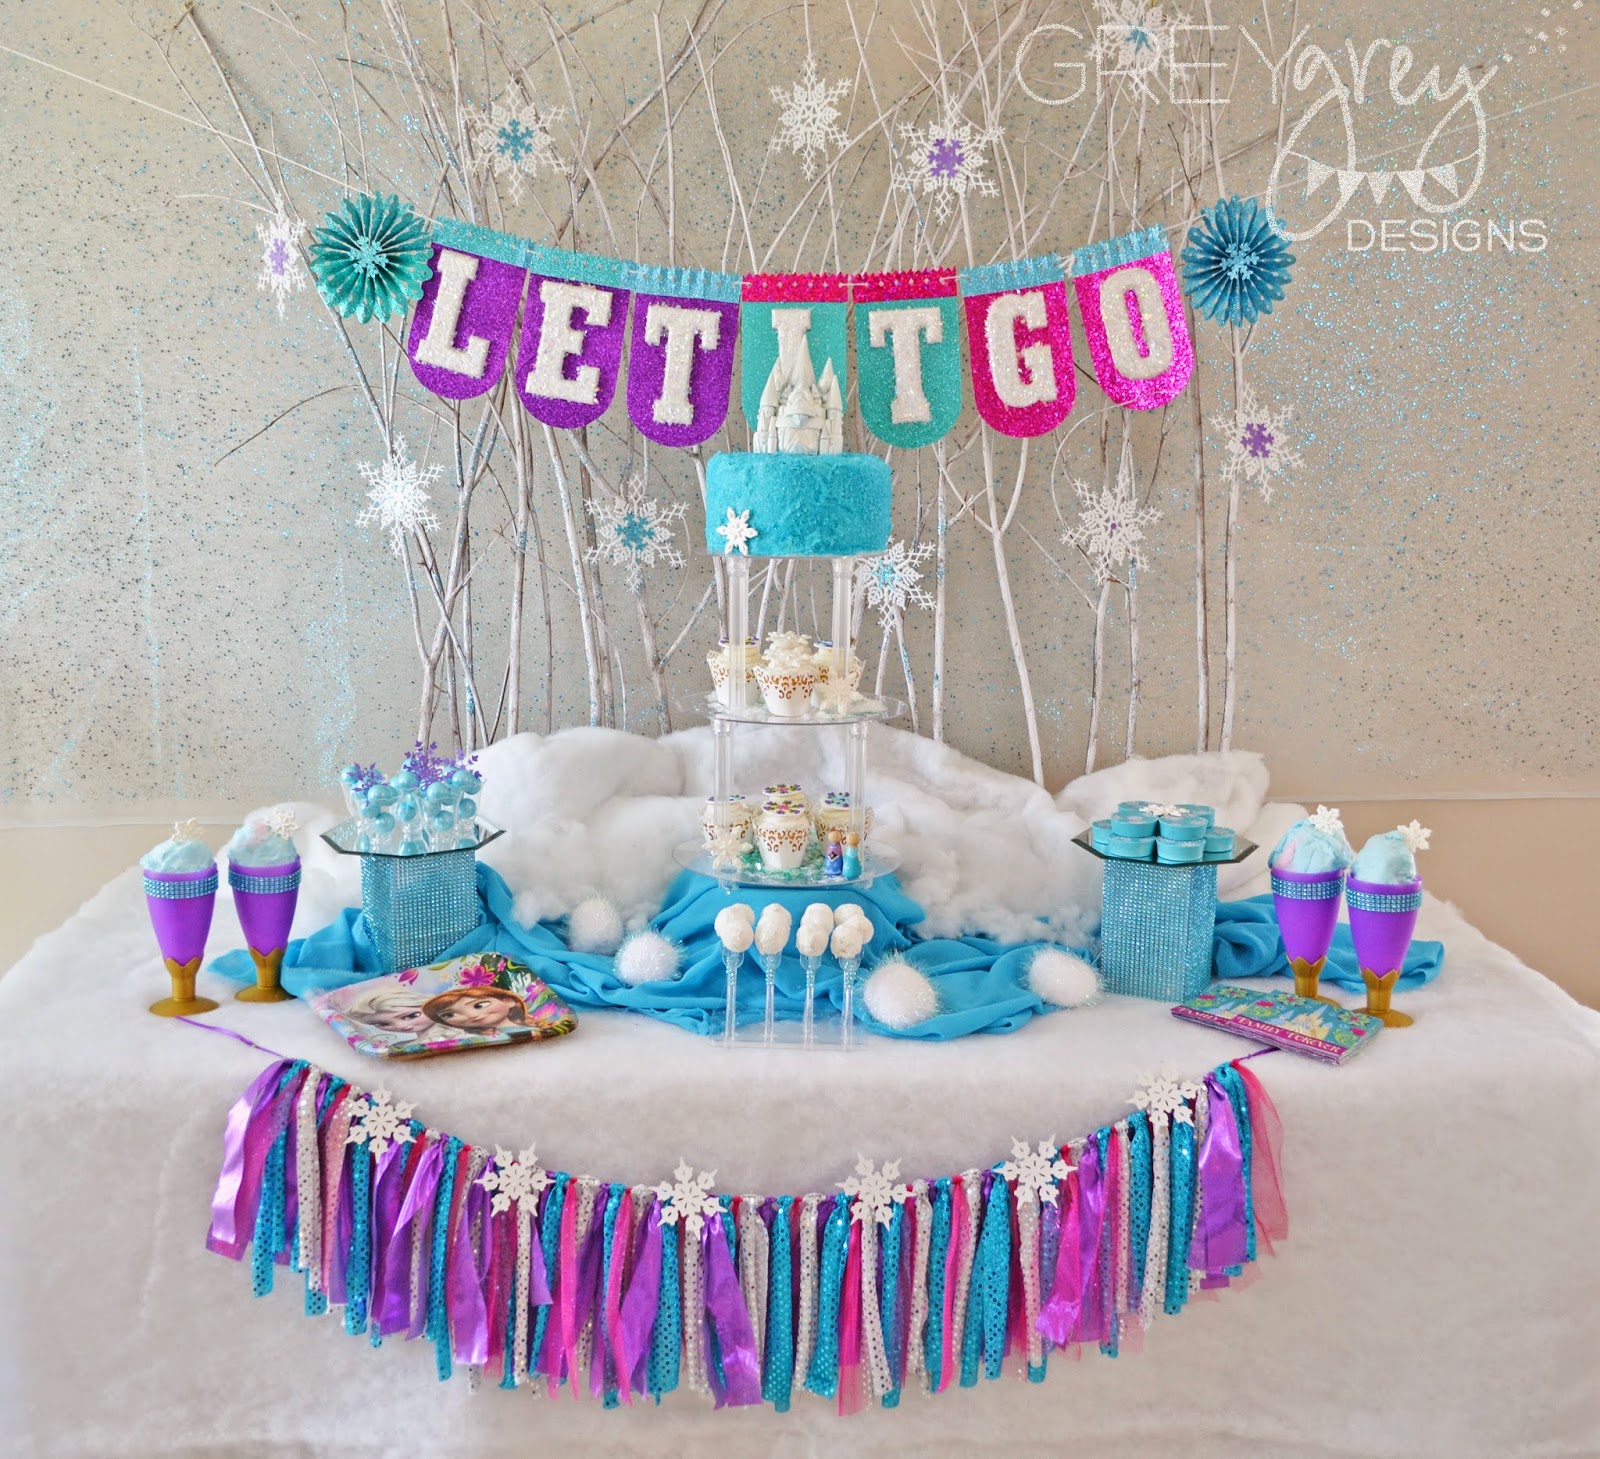 GreyGrey Designs Giveaway Frozen Birthday  Party  Pack  for 